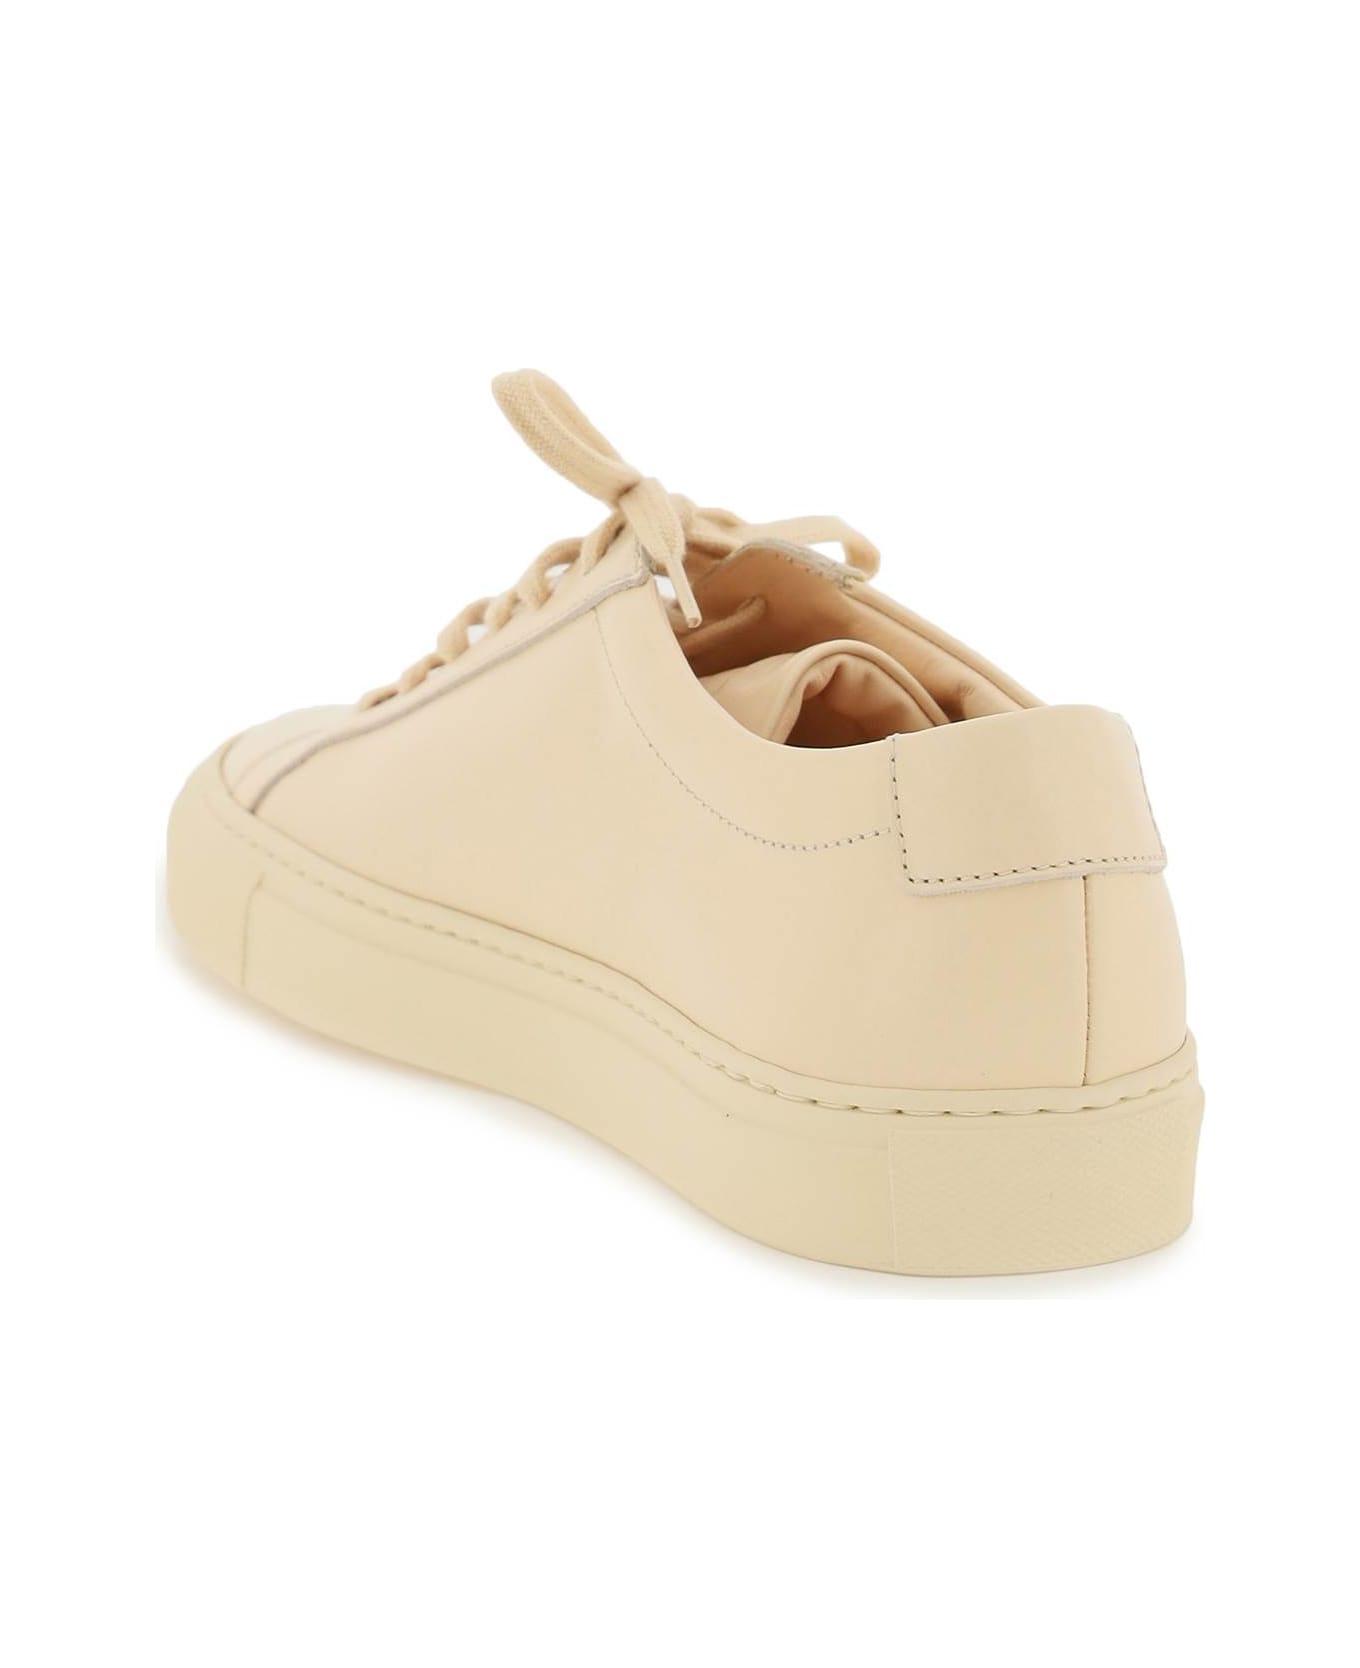 Common Projects Original Achilles Sneakers - APRICOT (Pink)